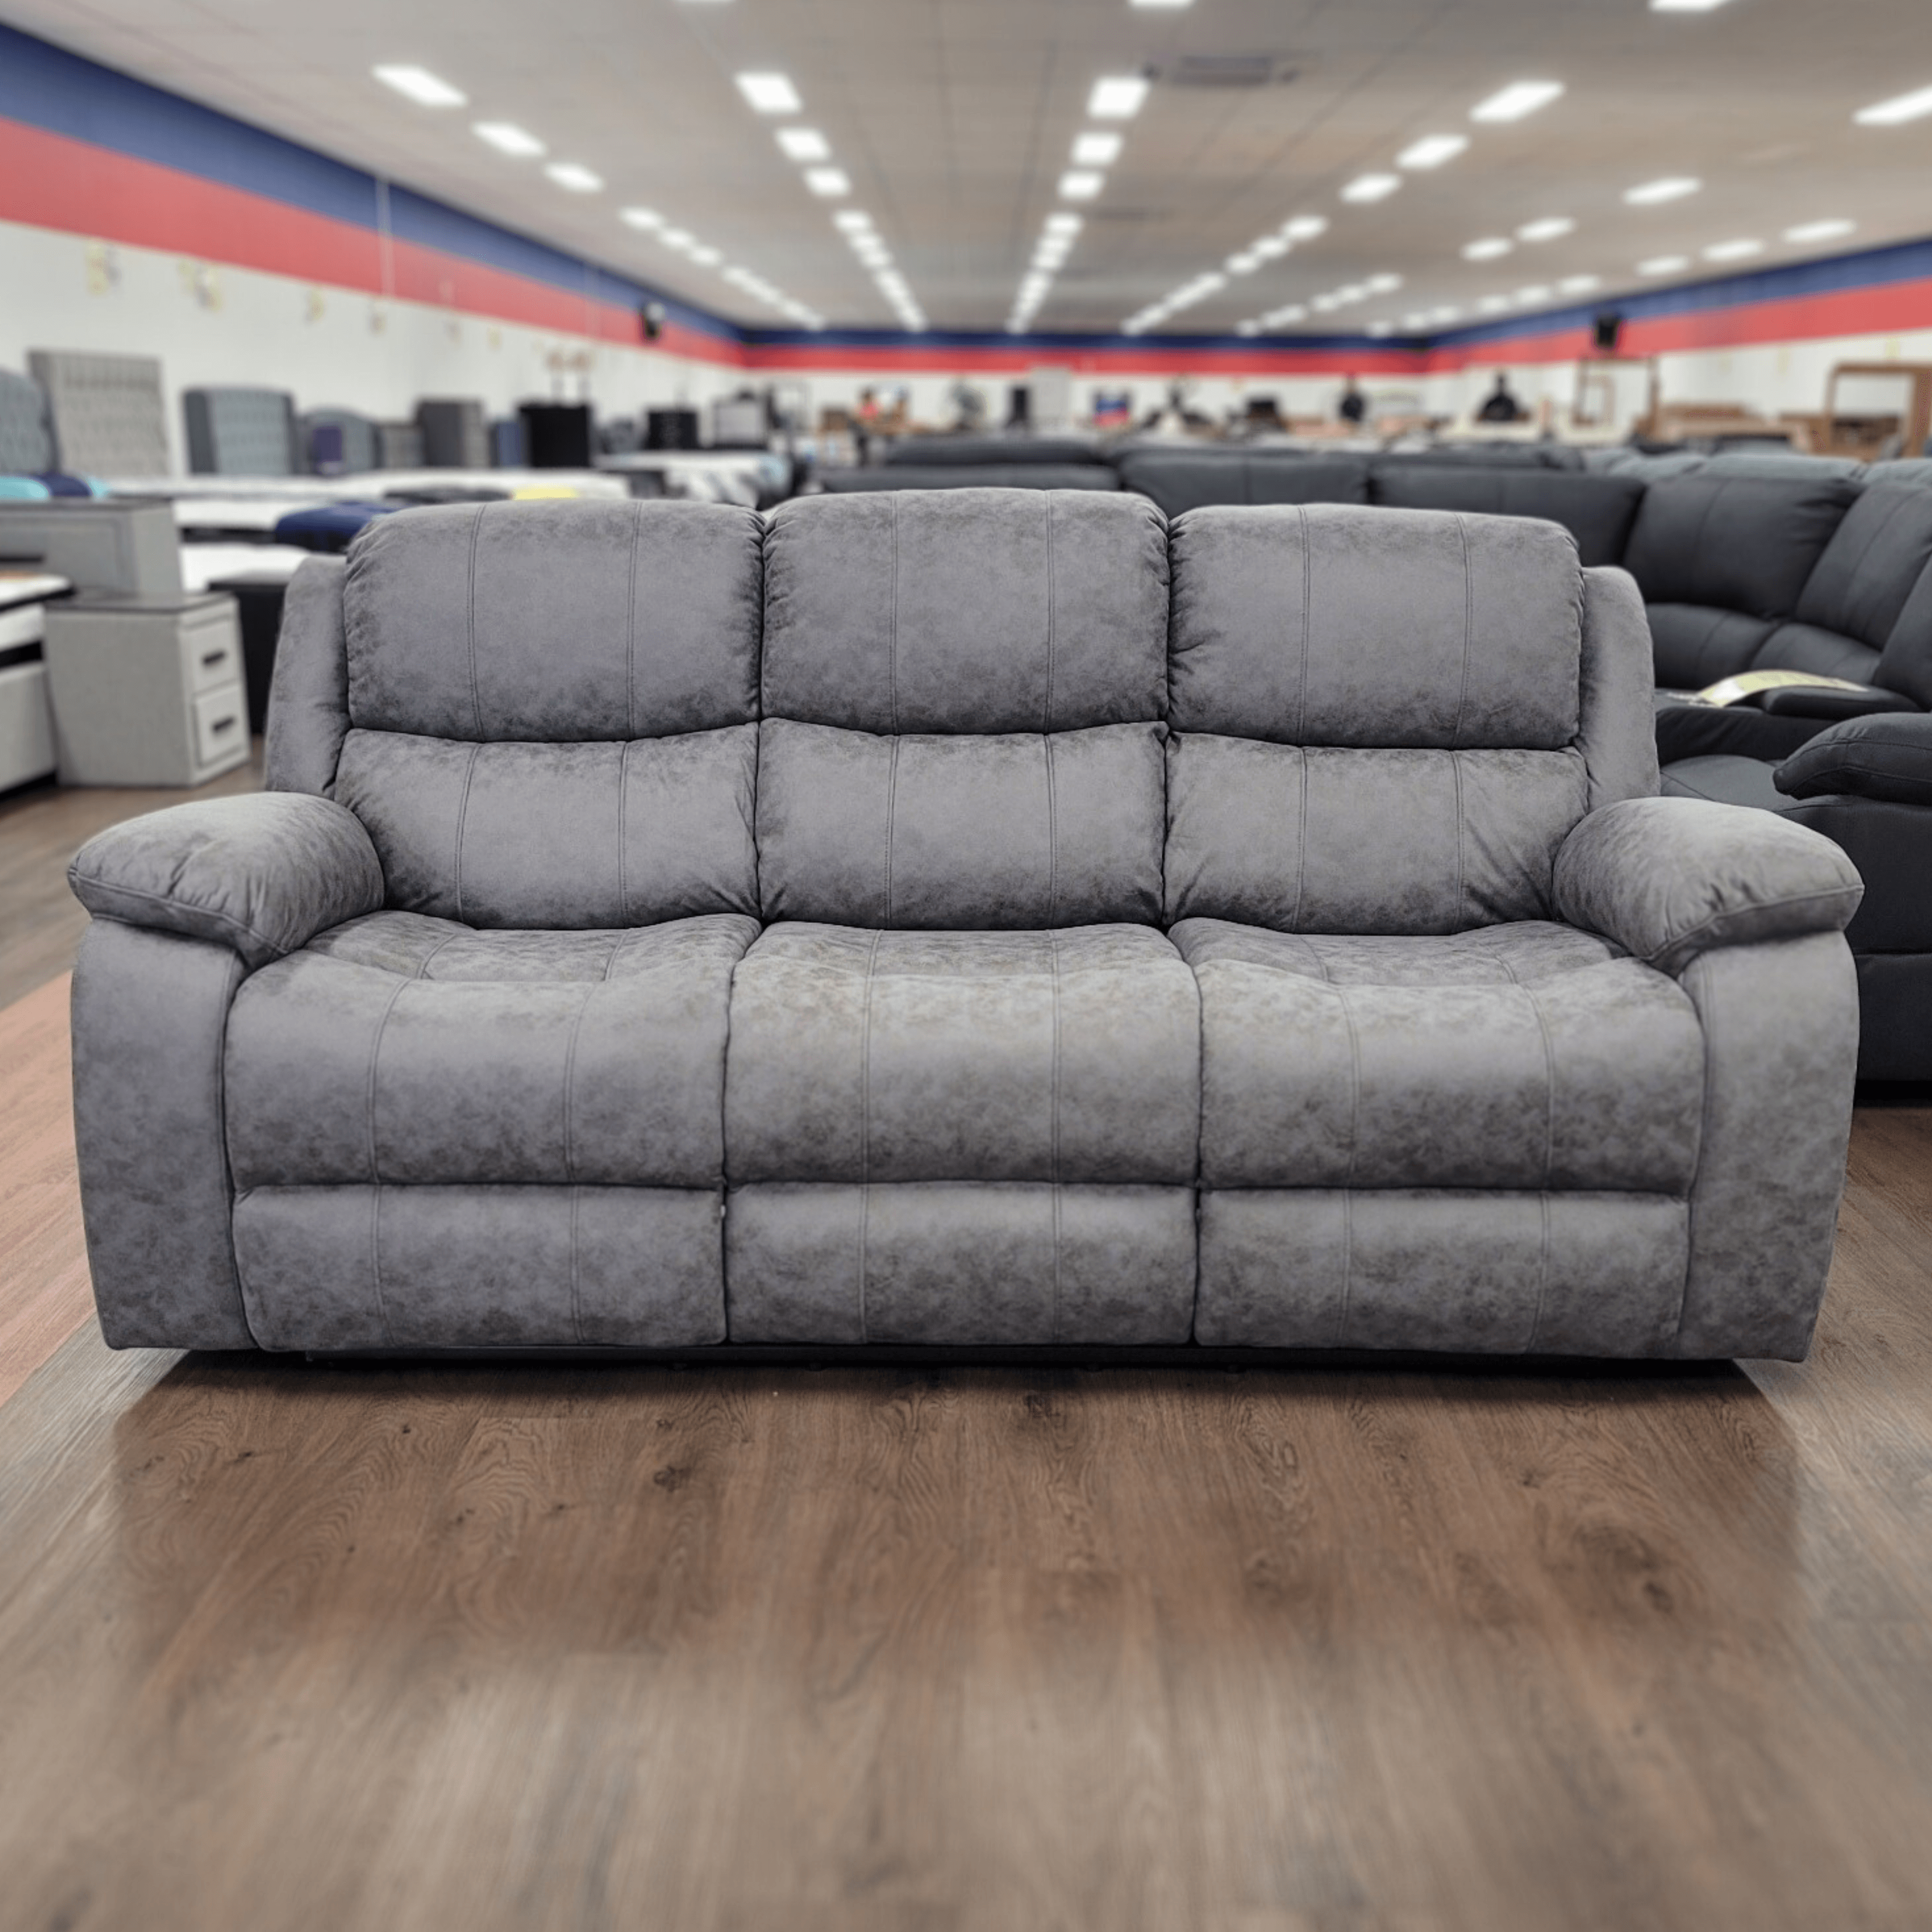 Bliss Recliner Lounge Suite